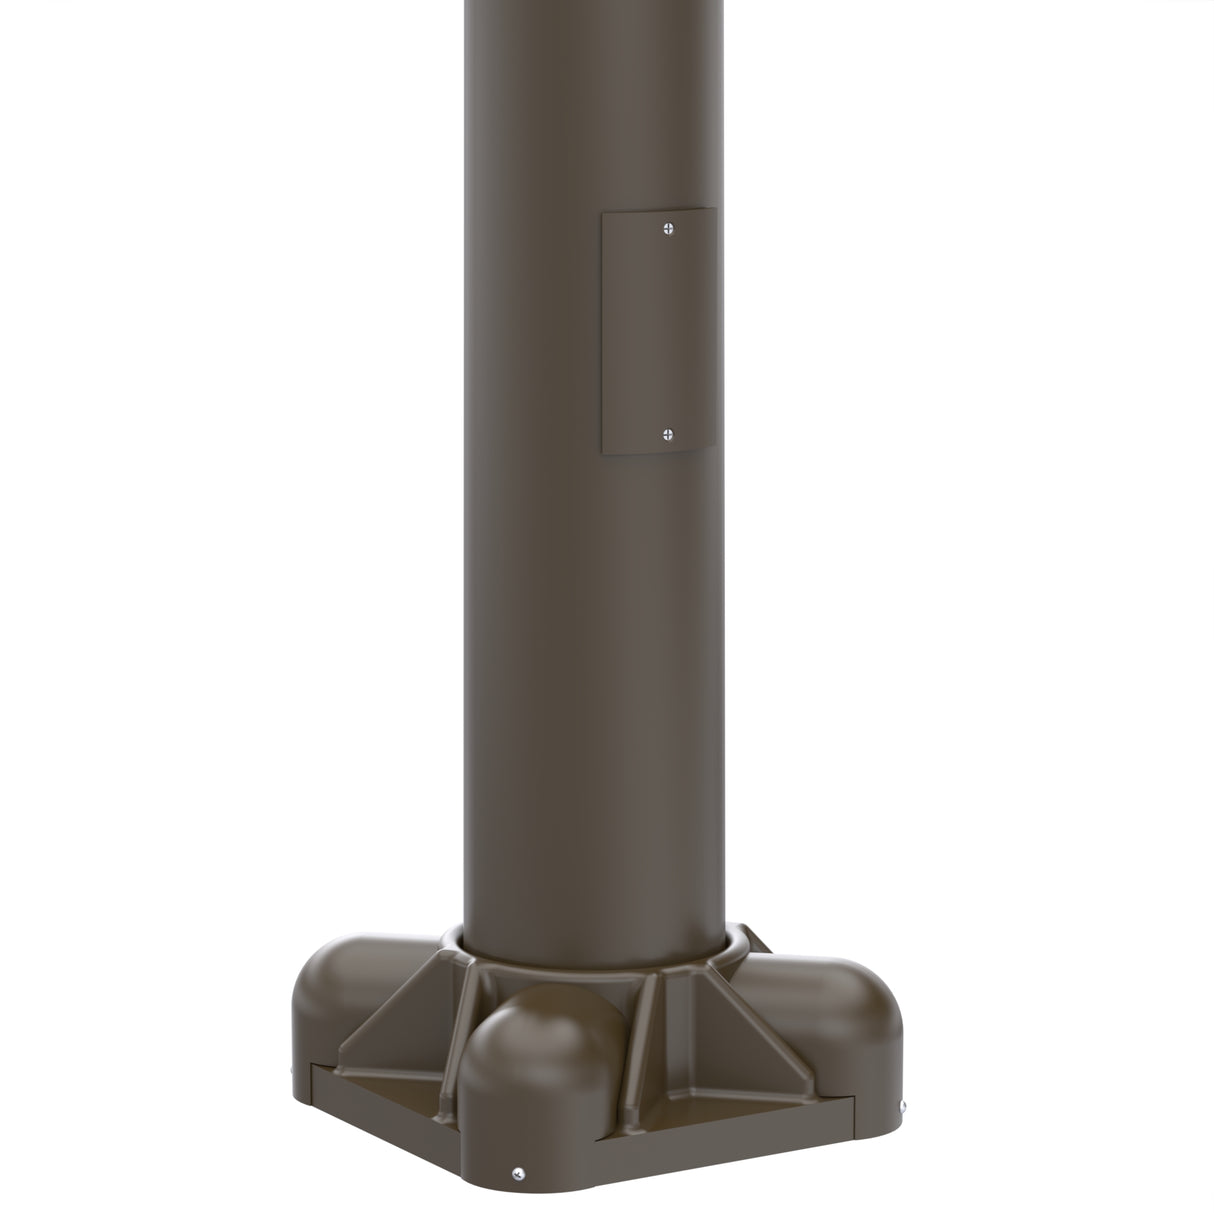 37' Tall x 10" Base OD x 6.0" Top OD x 0.188" Thick, Round Tapered Aluminum, Anchor Base Light Pole